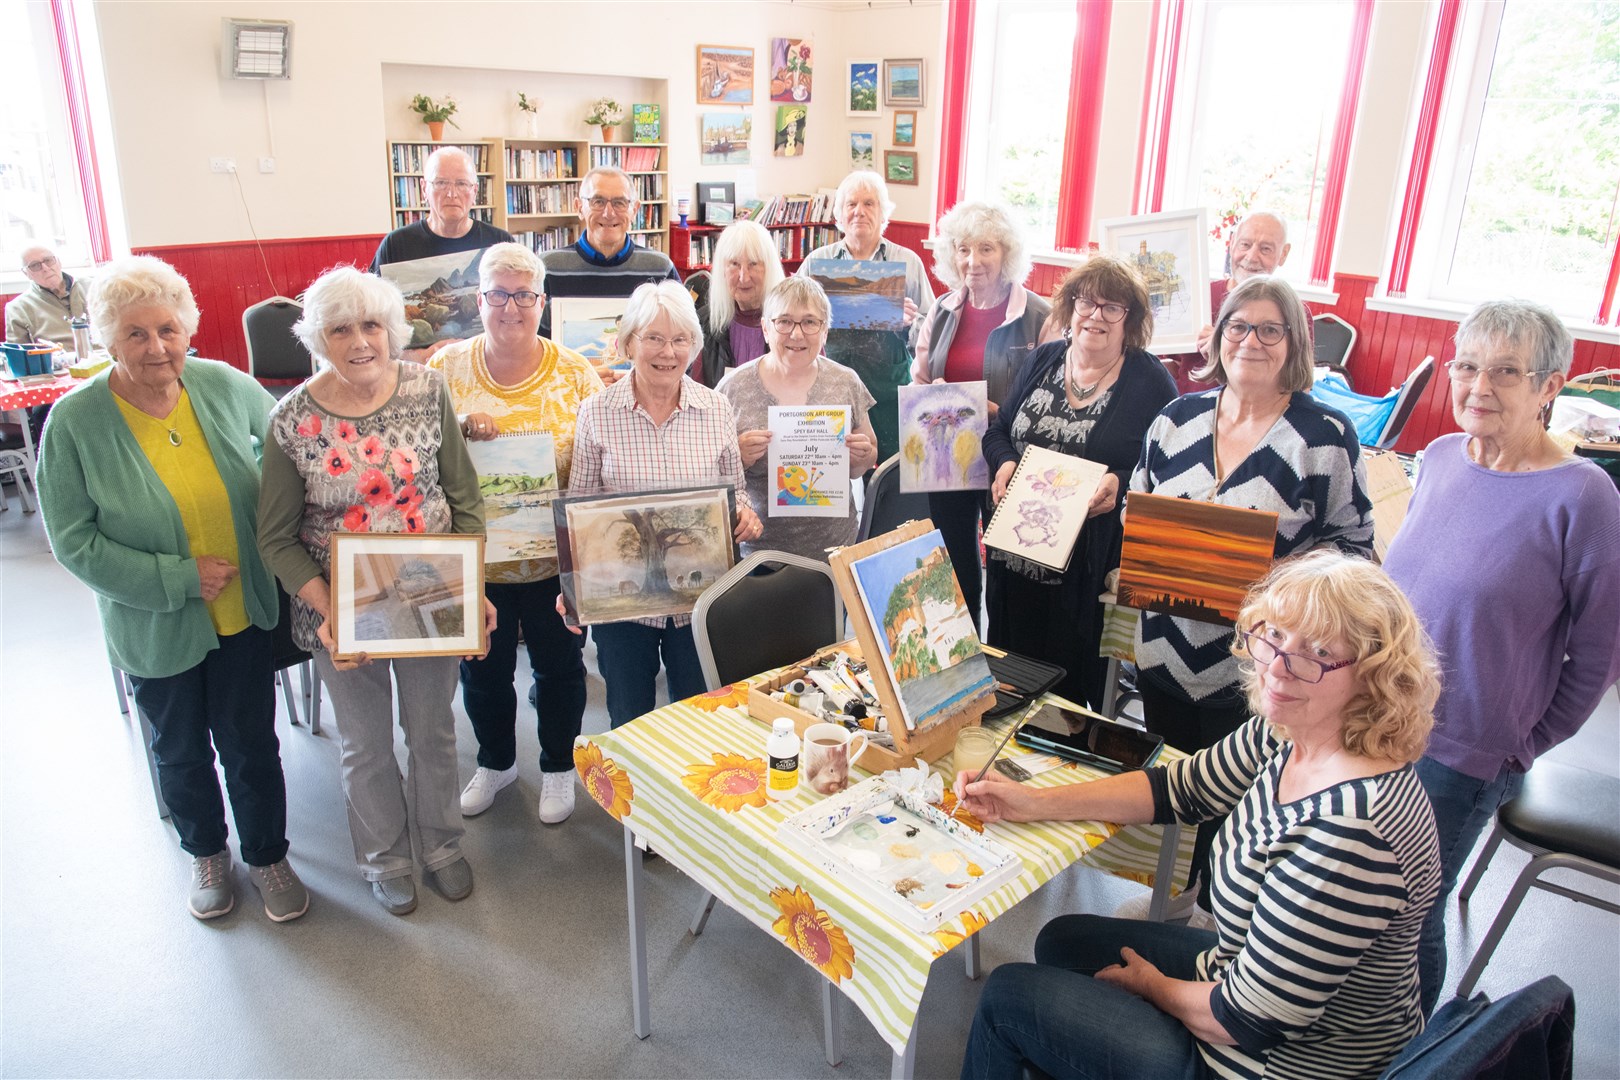 Portgordon Art Group (pictured) and their colleagues in Clochan Art Group, will be moving to Spey Bay Community Hall. Picture: Daniel Forsyth